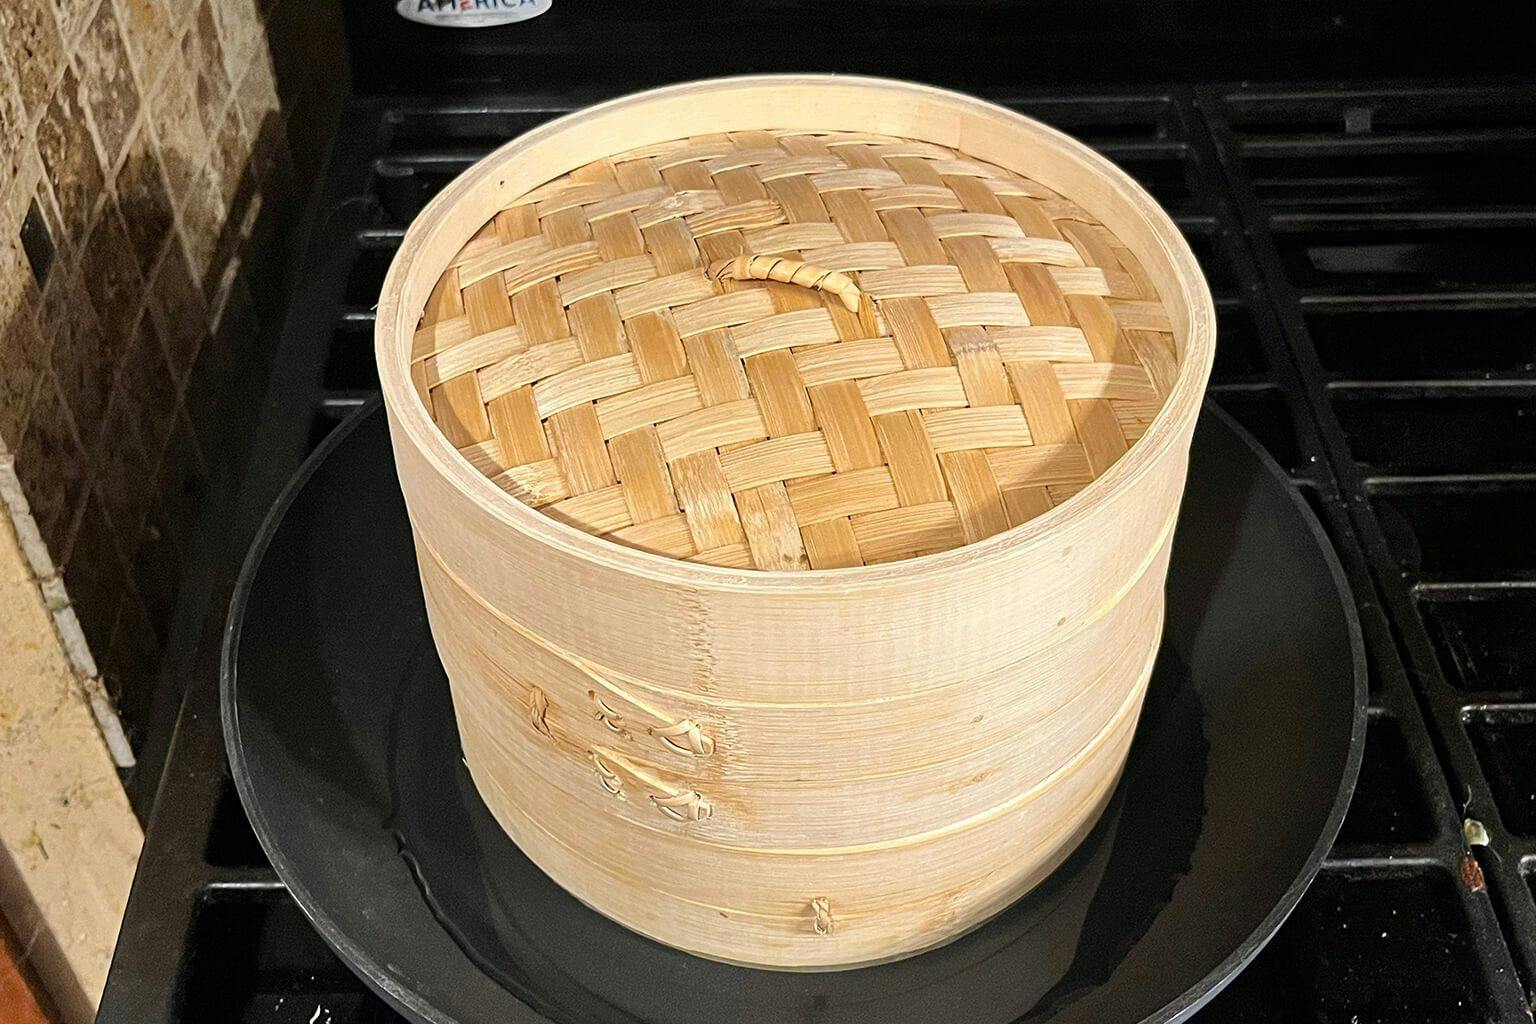 If you don’t have a bamboo steamer, you may cook in boiling water instead